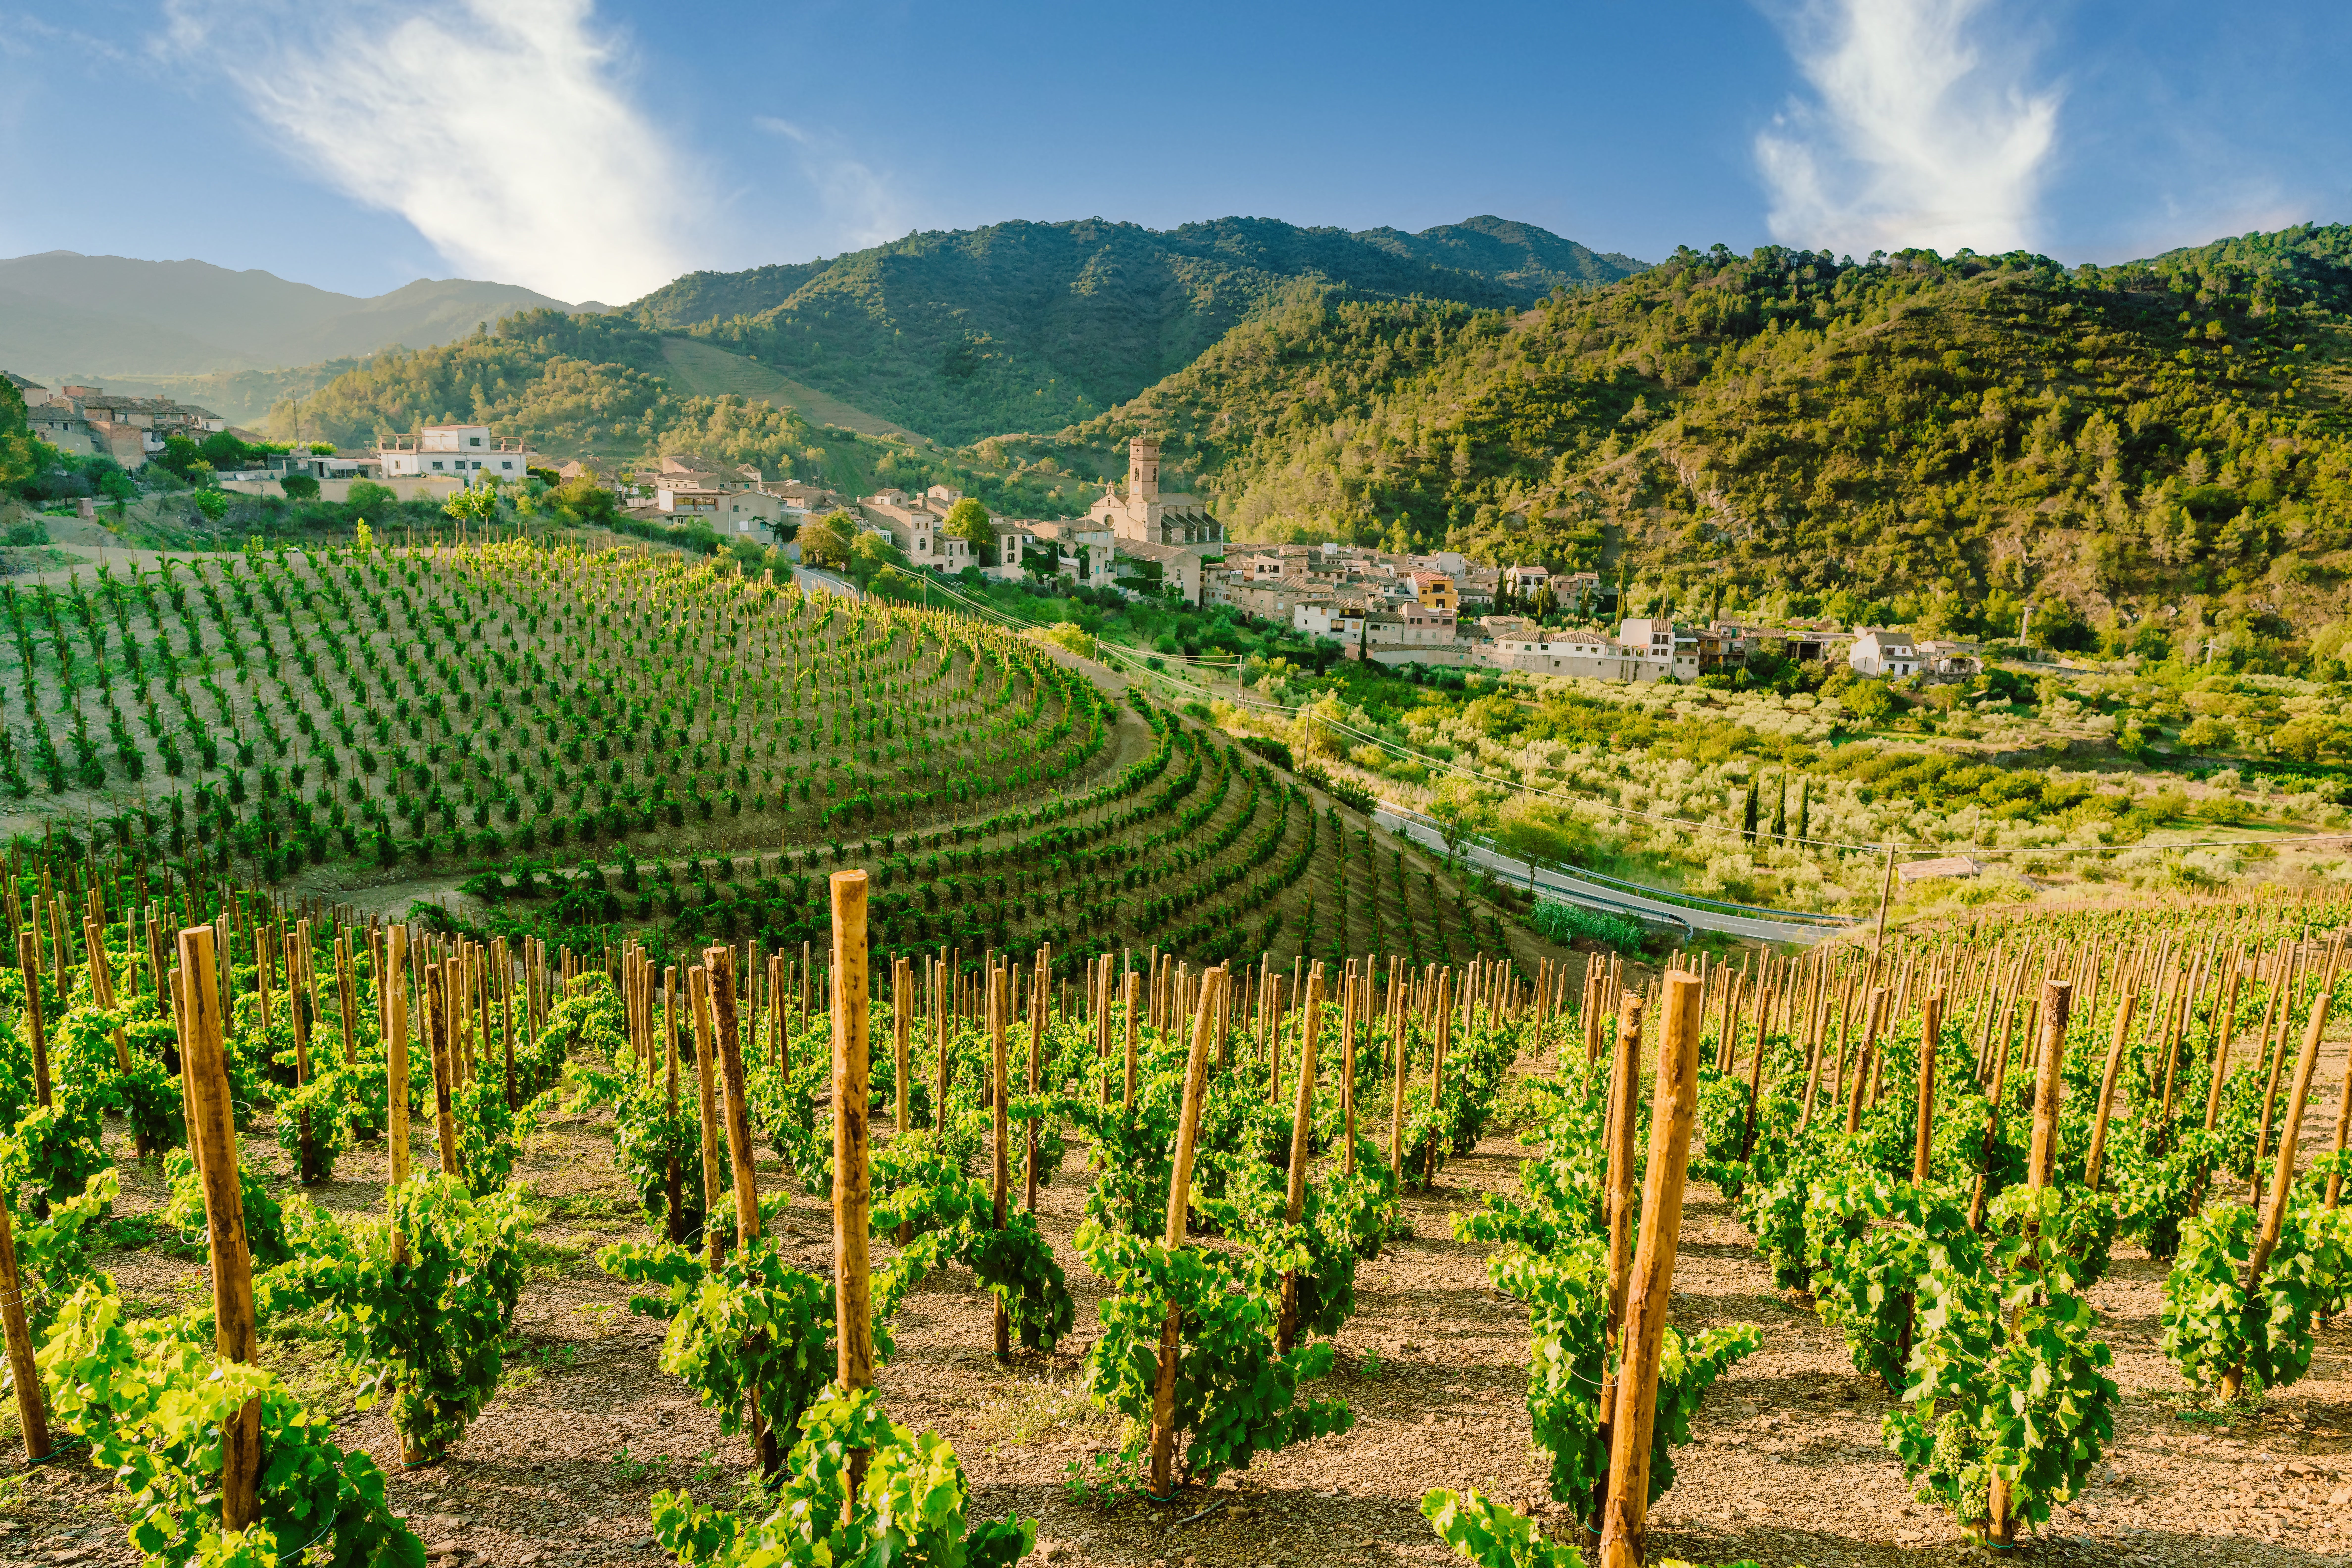 There are plenty of vineyard and winery tours around Costa Dorada, especially in the Priorat wine region